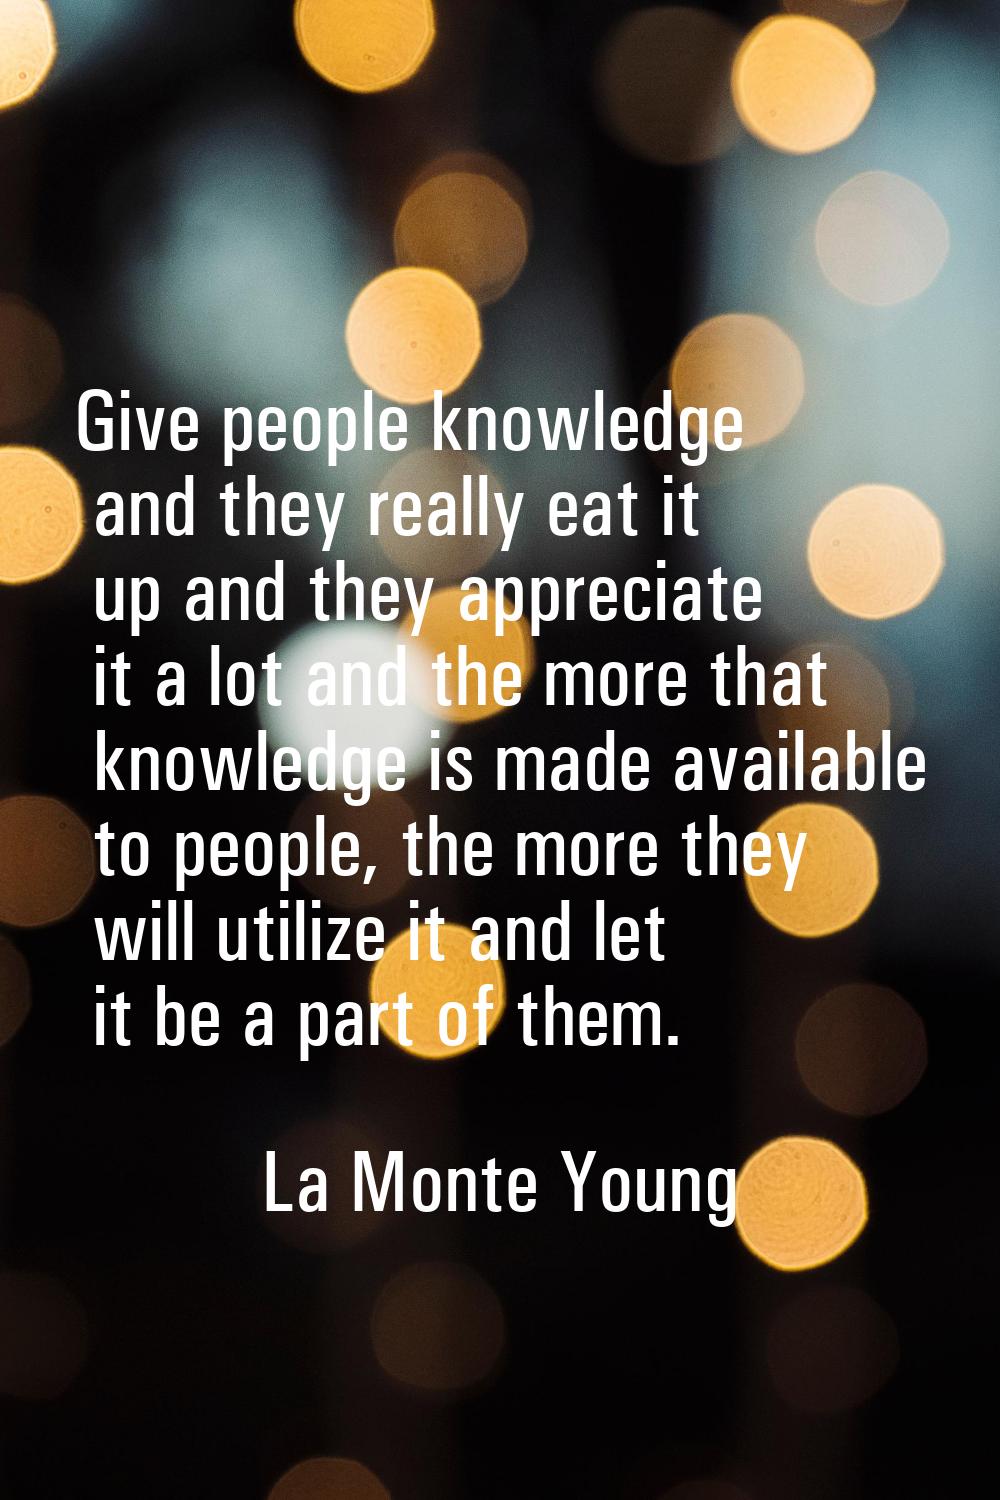 Give people knowledge and they really eat it up and they appreciate it a lot and the more that know